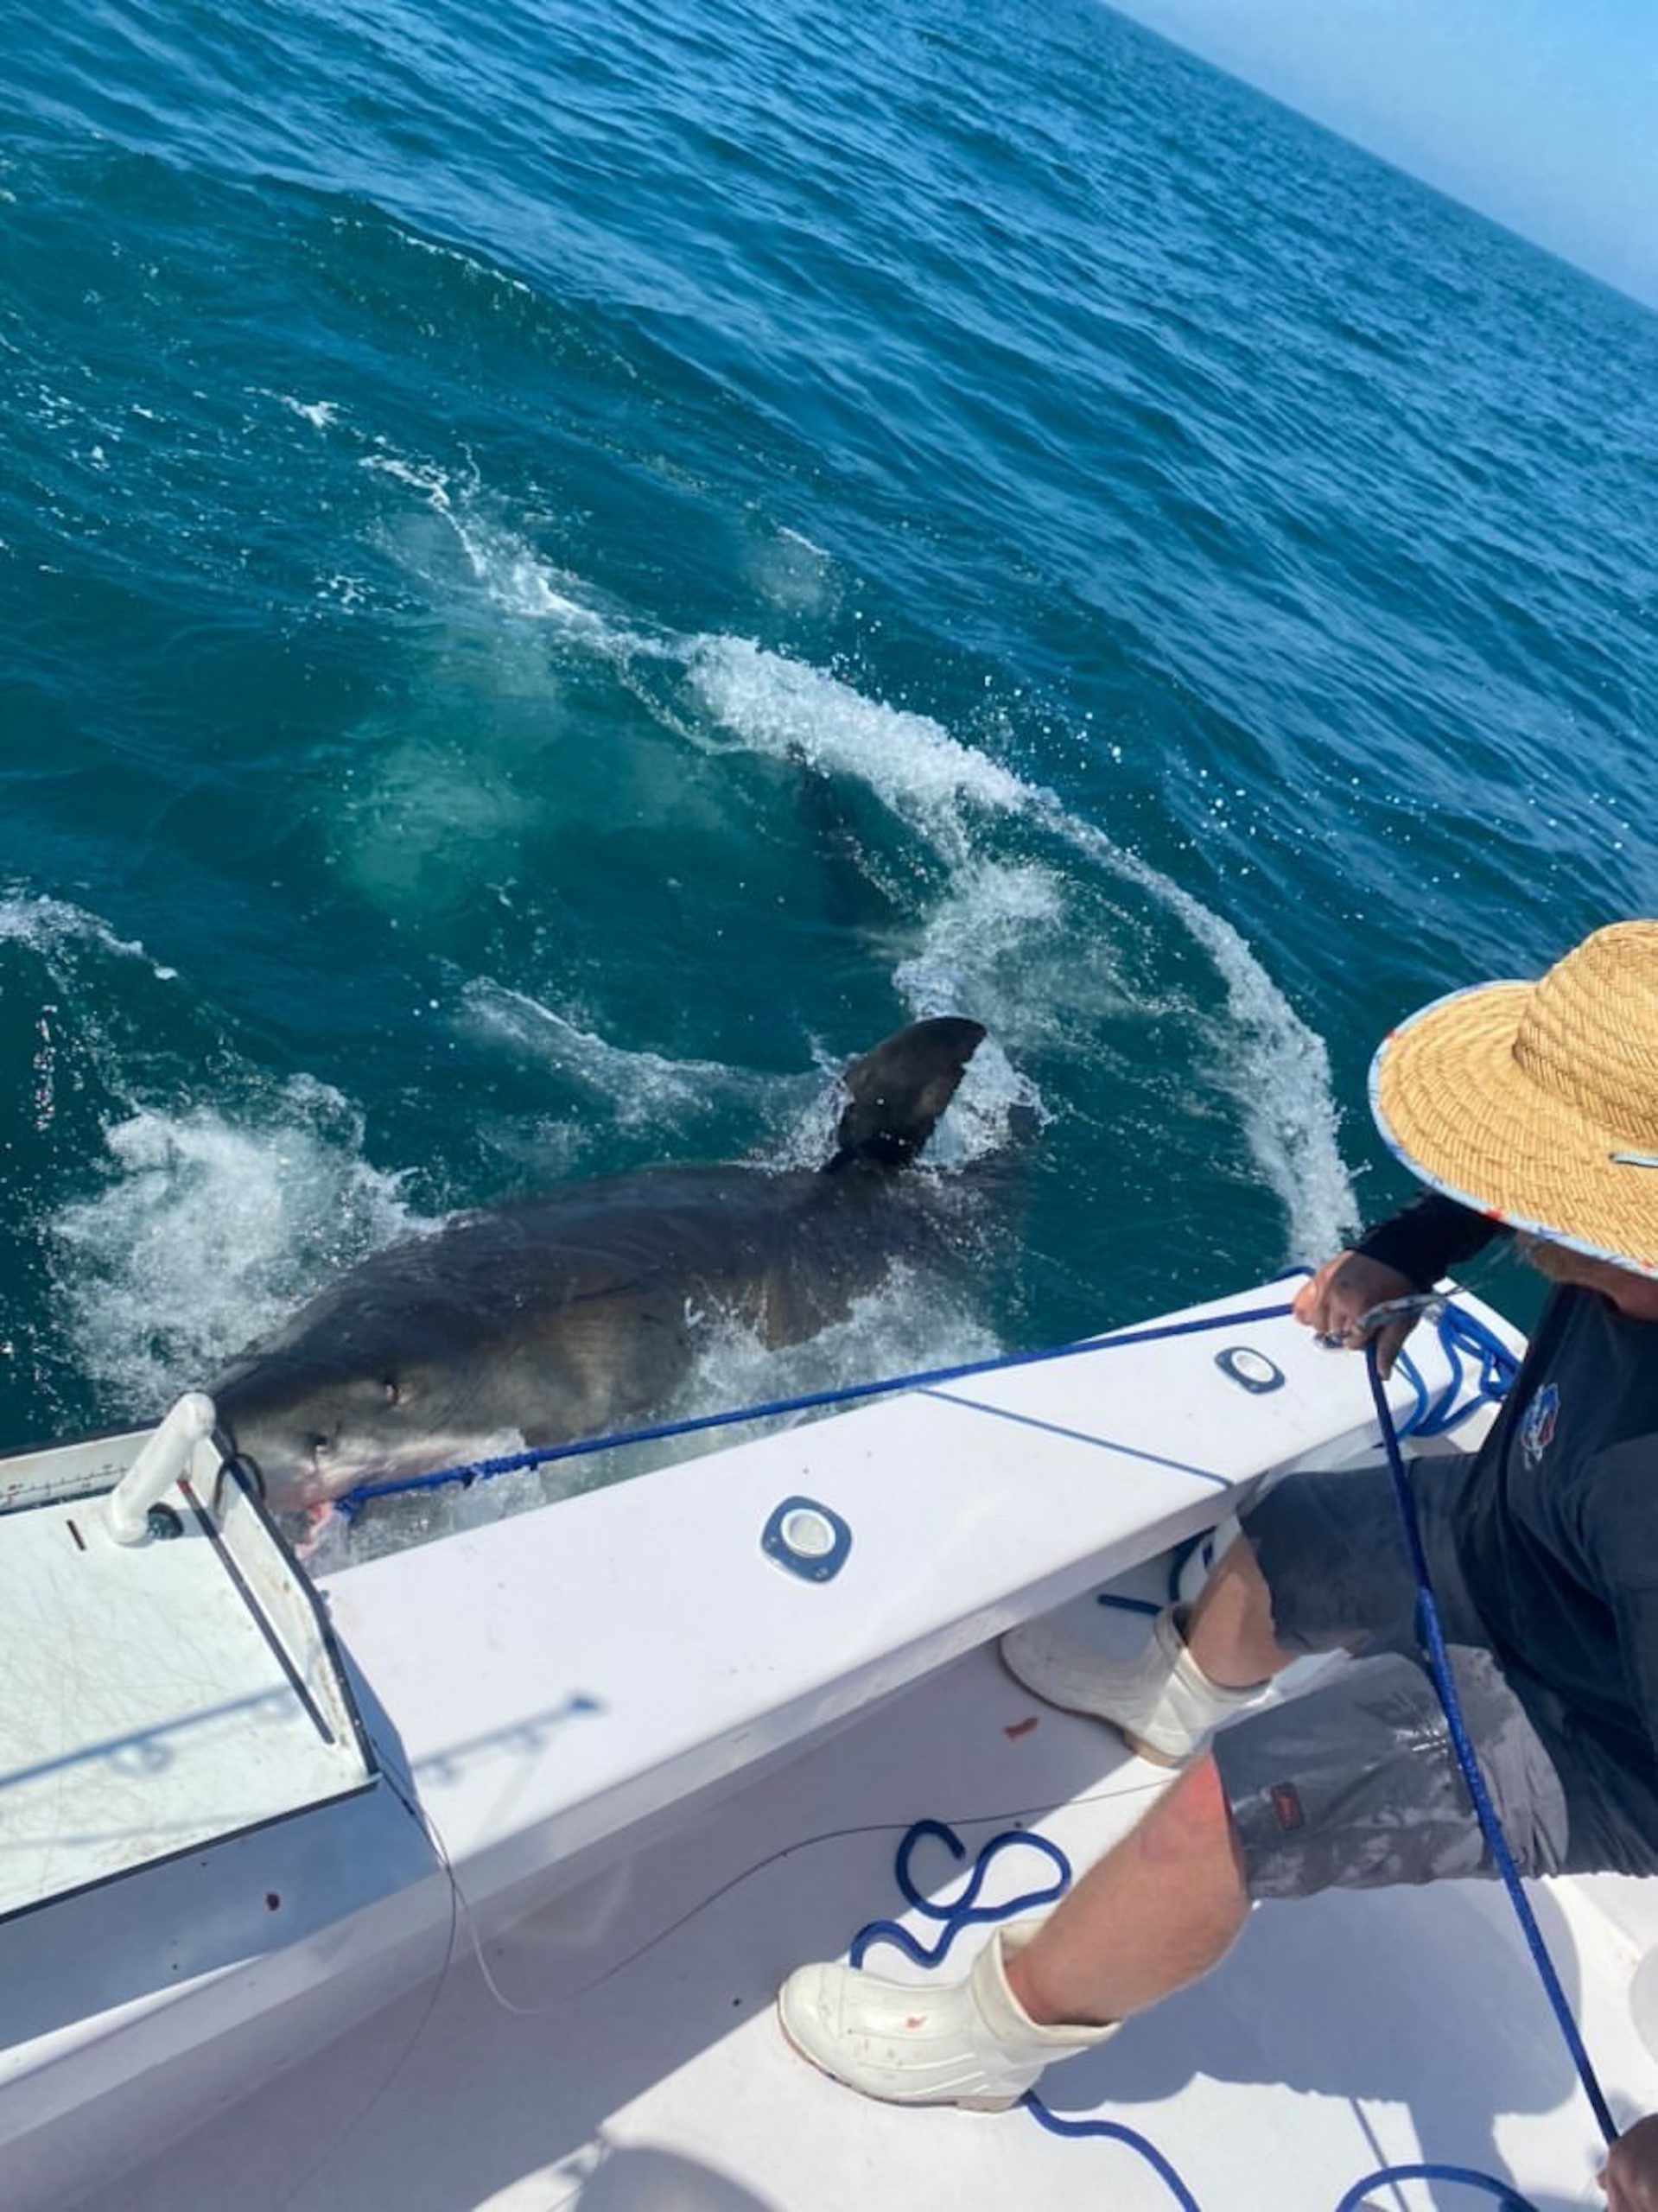 12 Foot Great White Shark Encounter Off of Ocean City